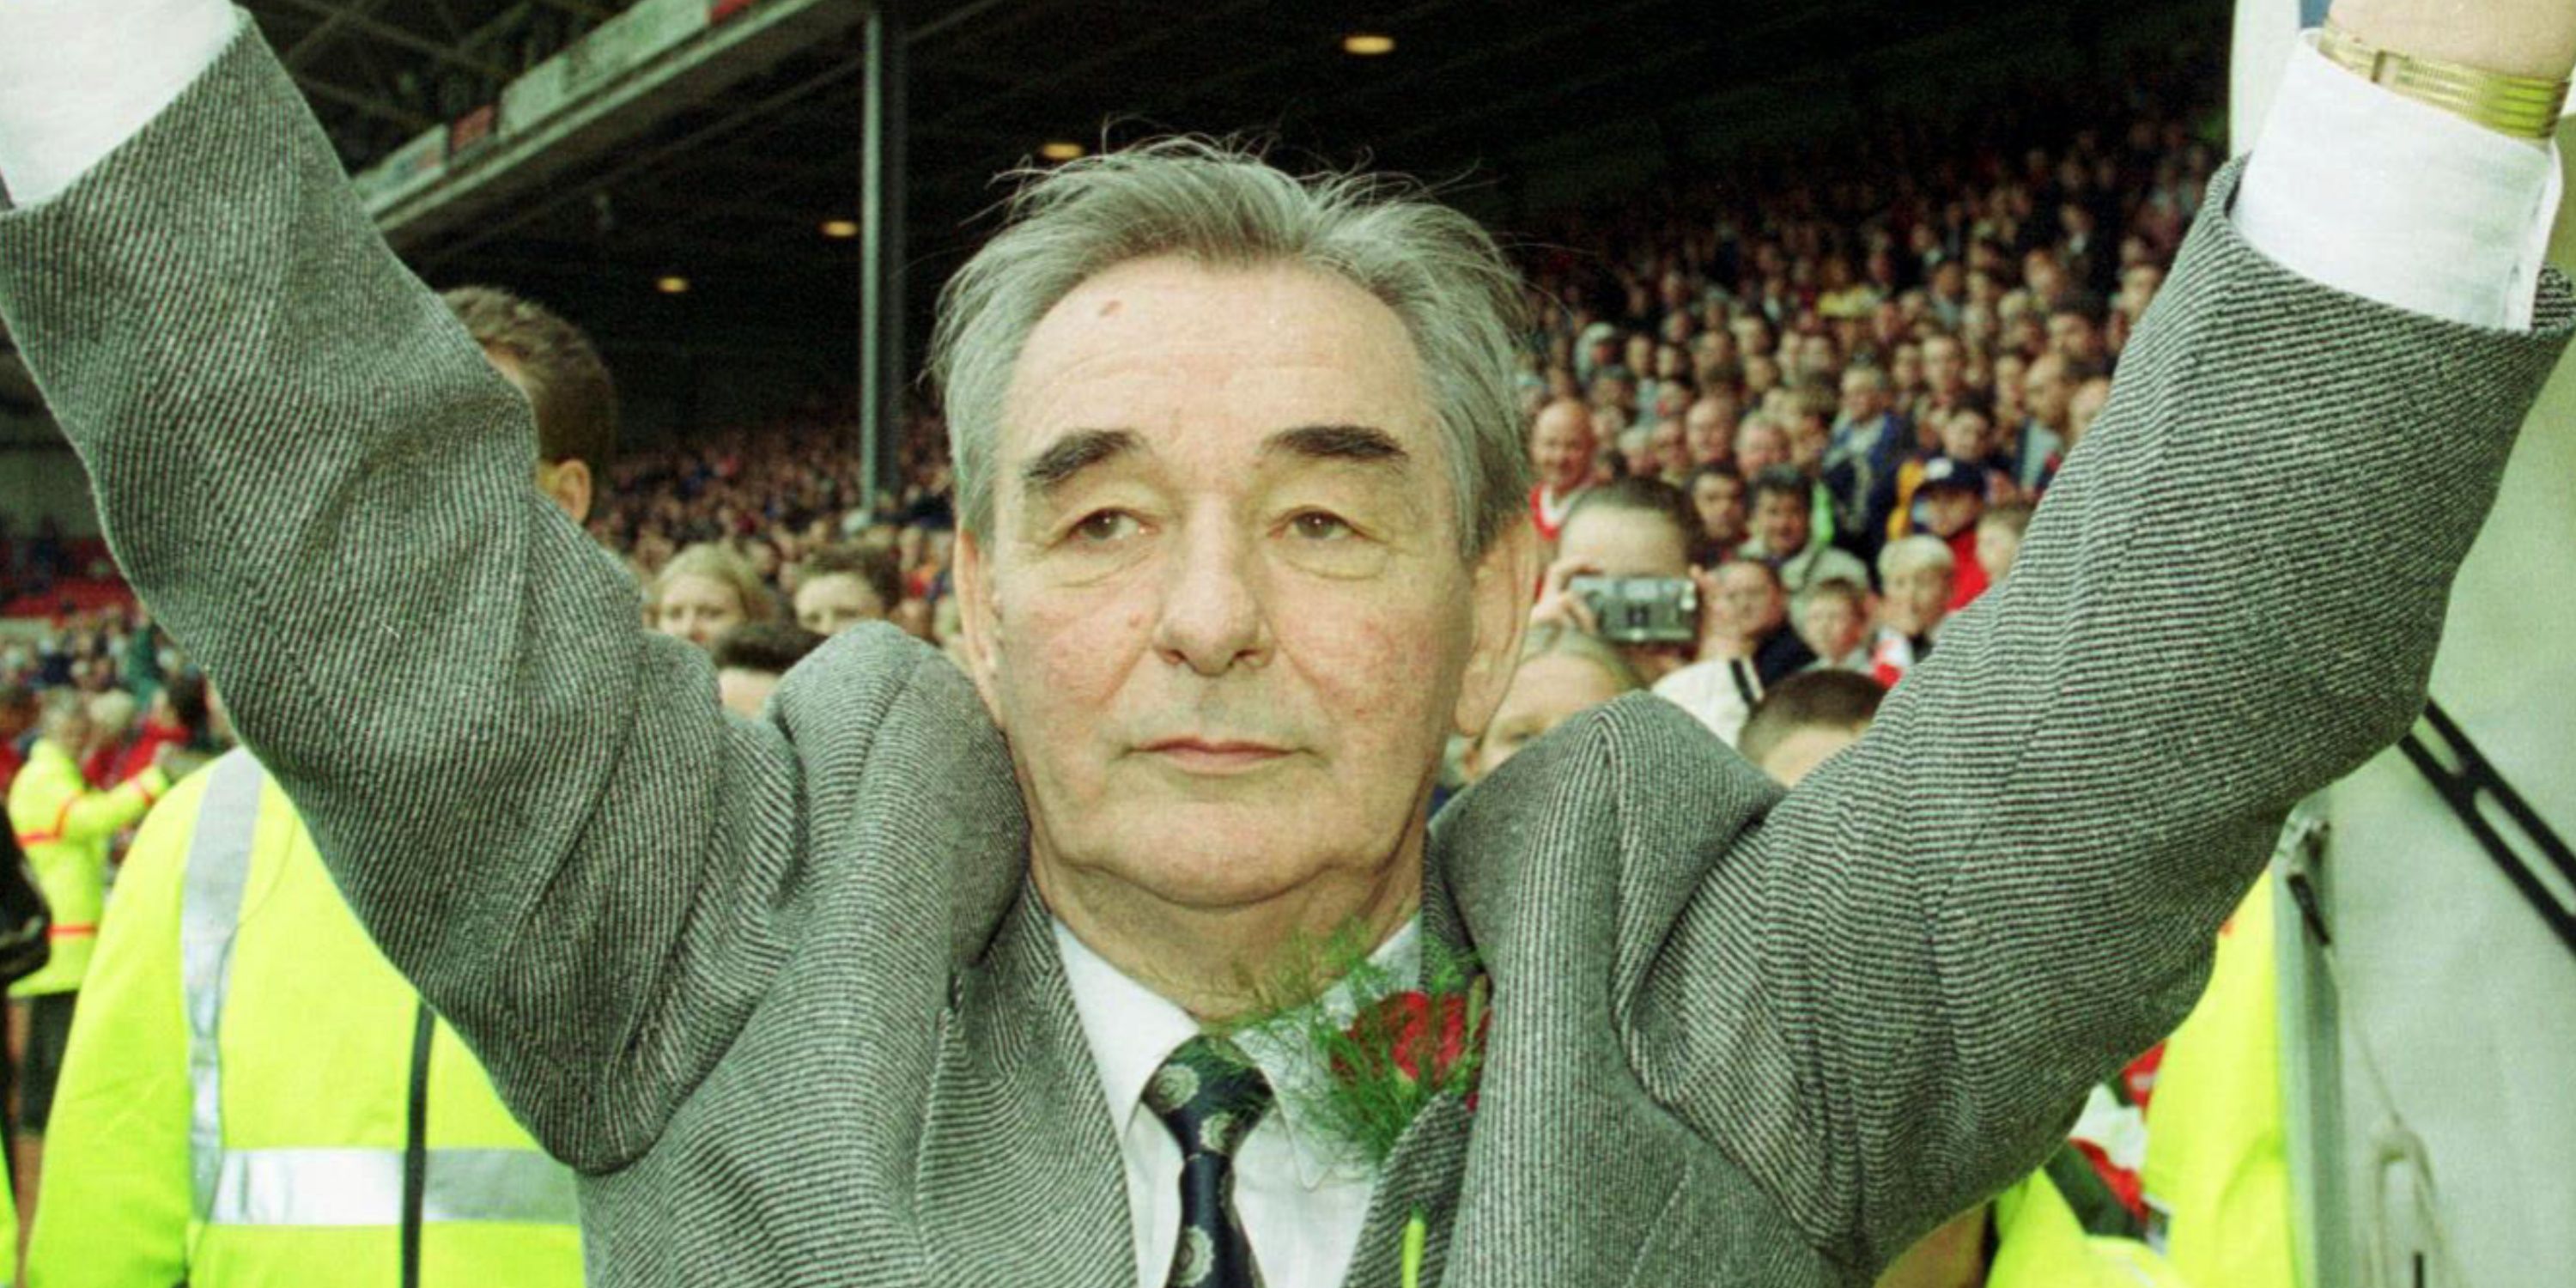 Brian Clough with his arms in the air